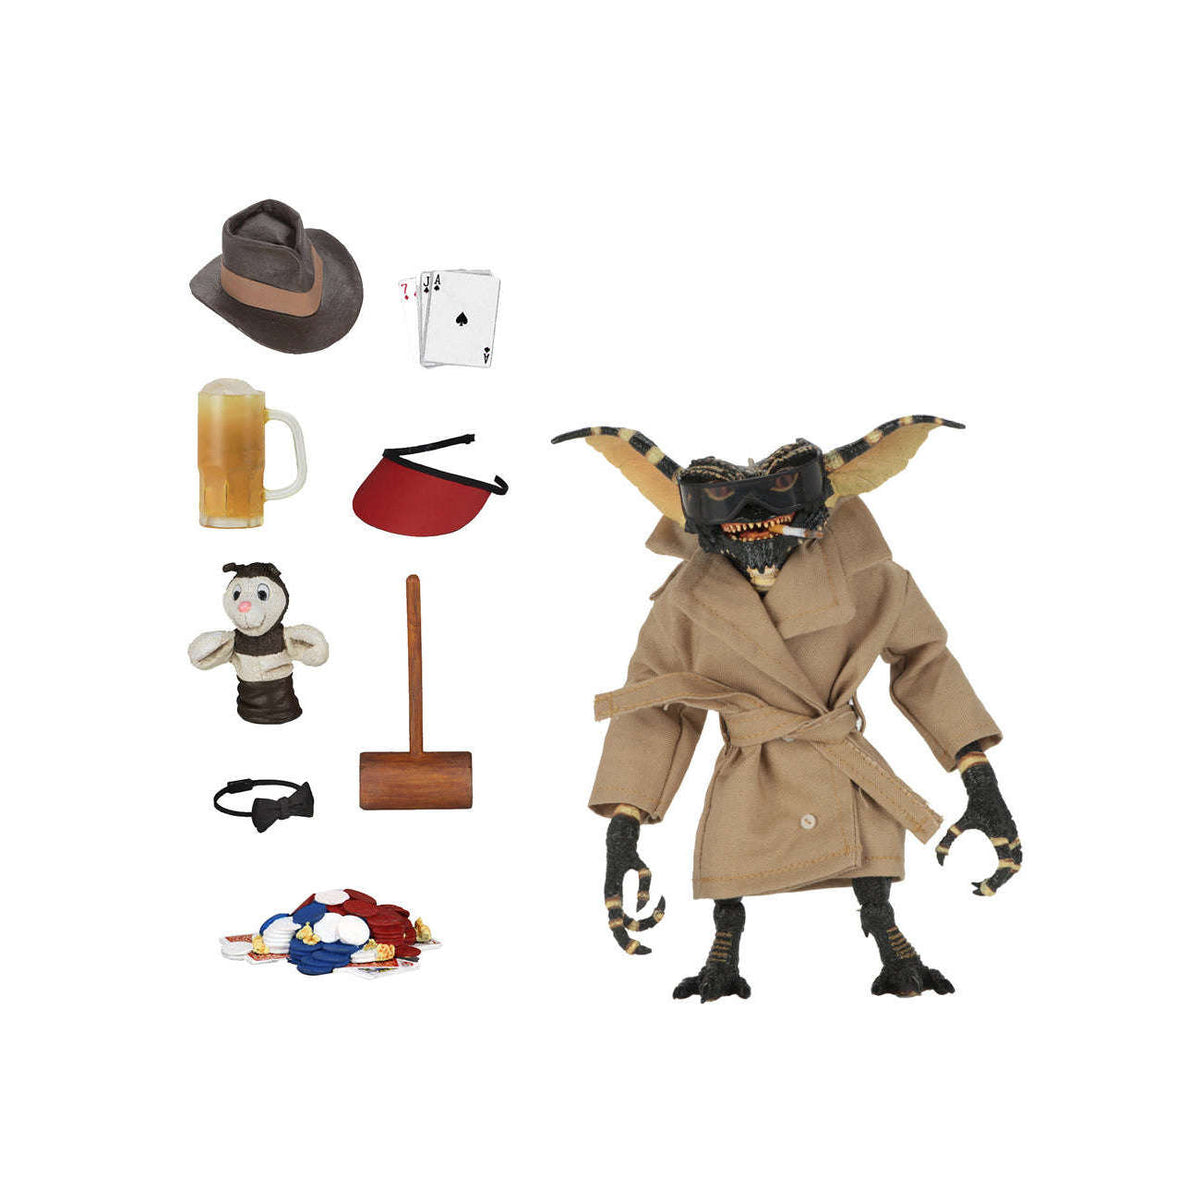 Gremlins: 7” Scale Ultimate Flasher Gremlin Collectible Action Figure